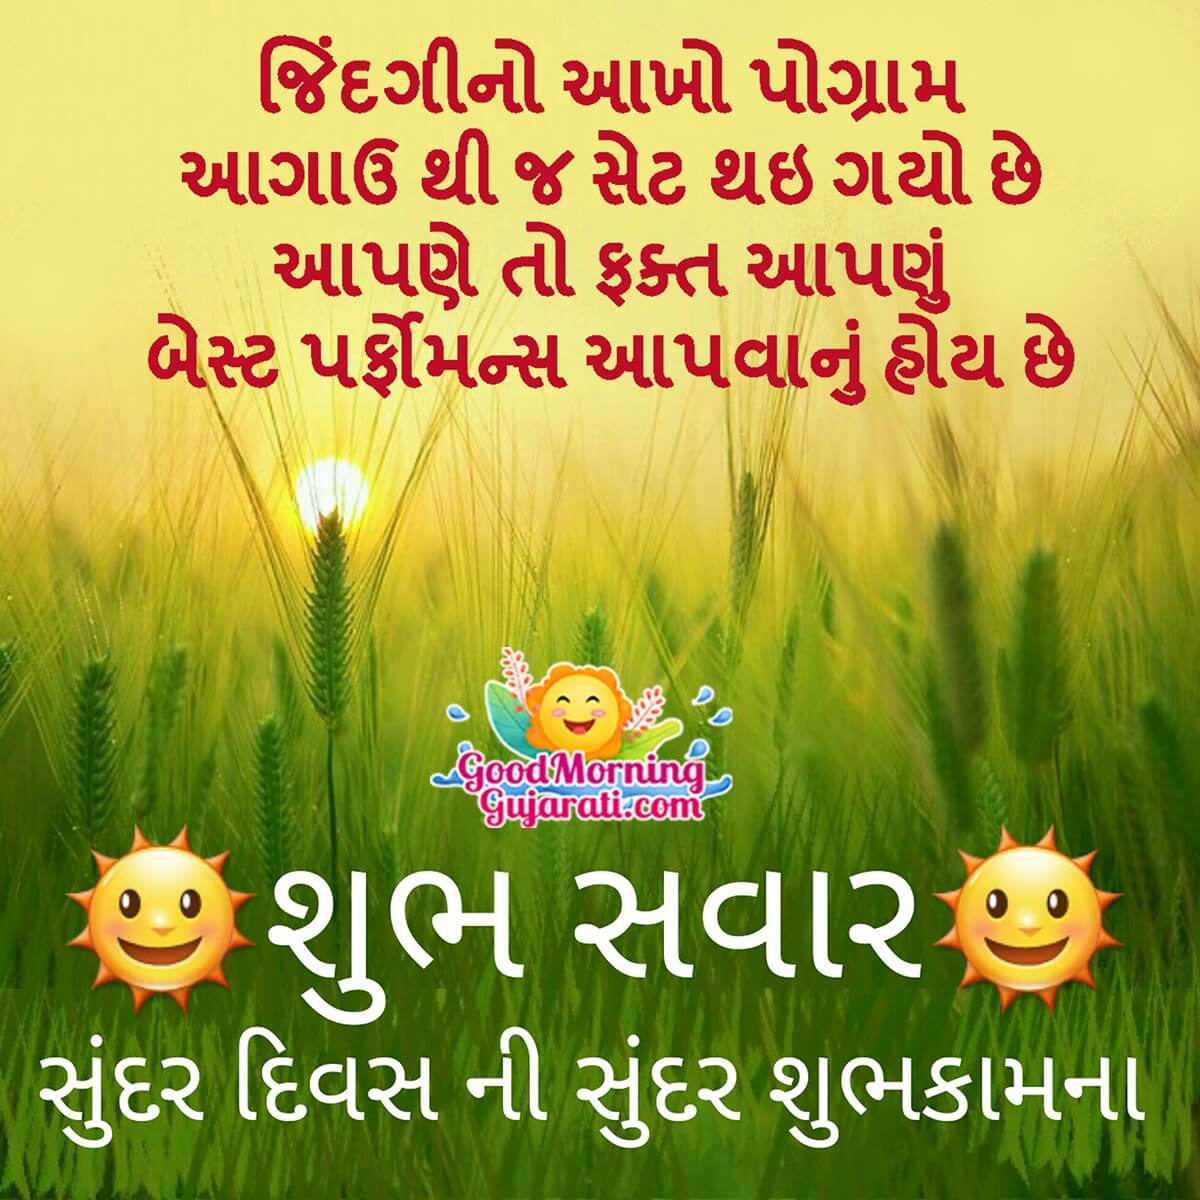 Good Morning Gujarati Quotes Images - Good Morning Wishes & Images In Gujarati